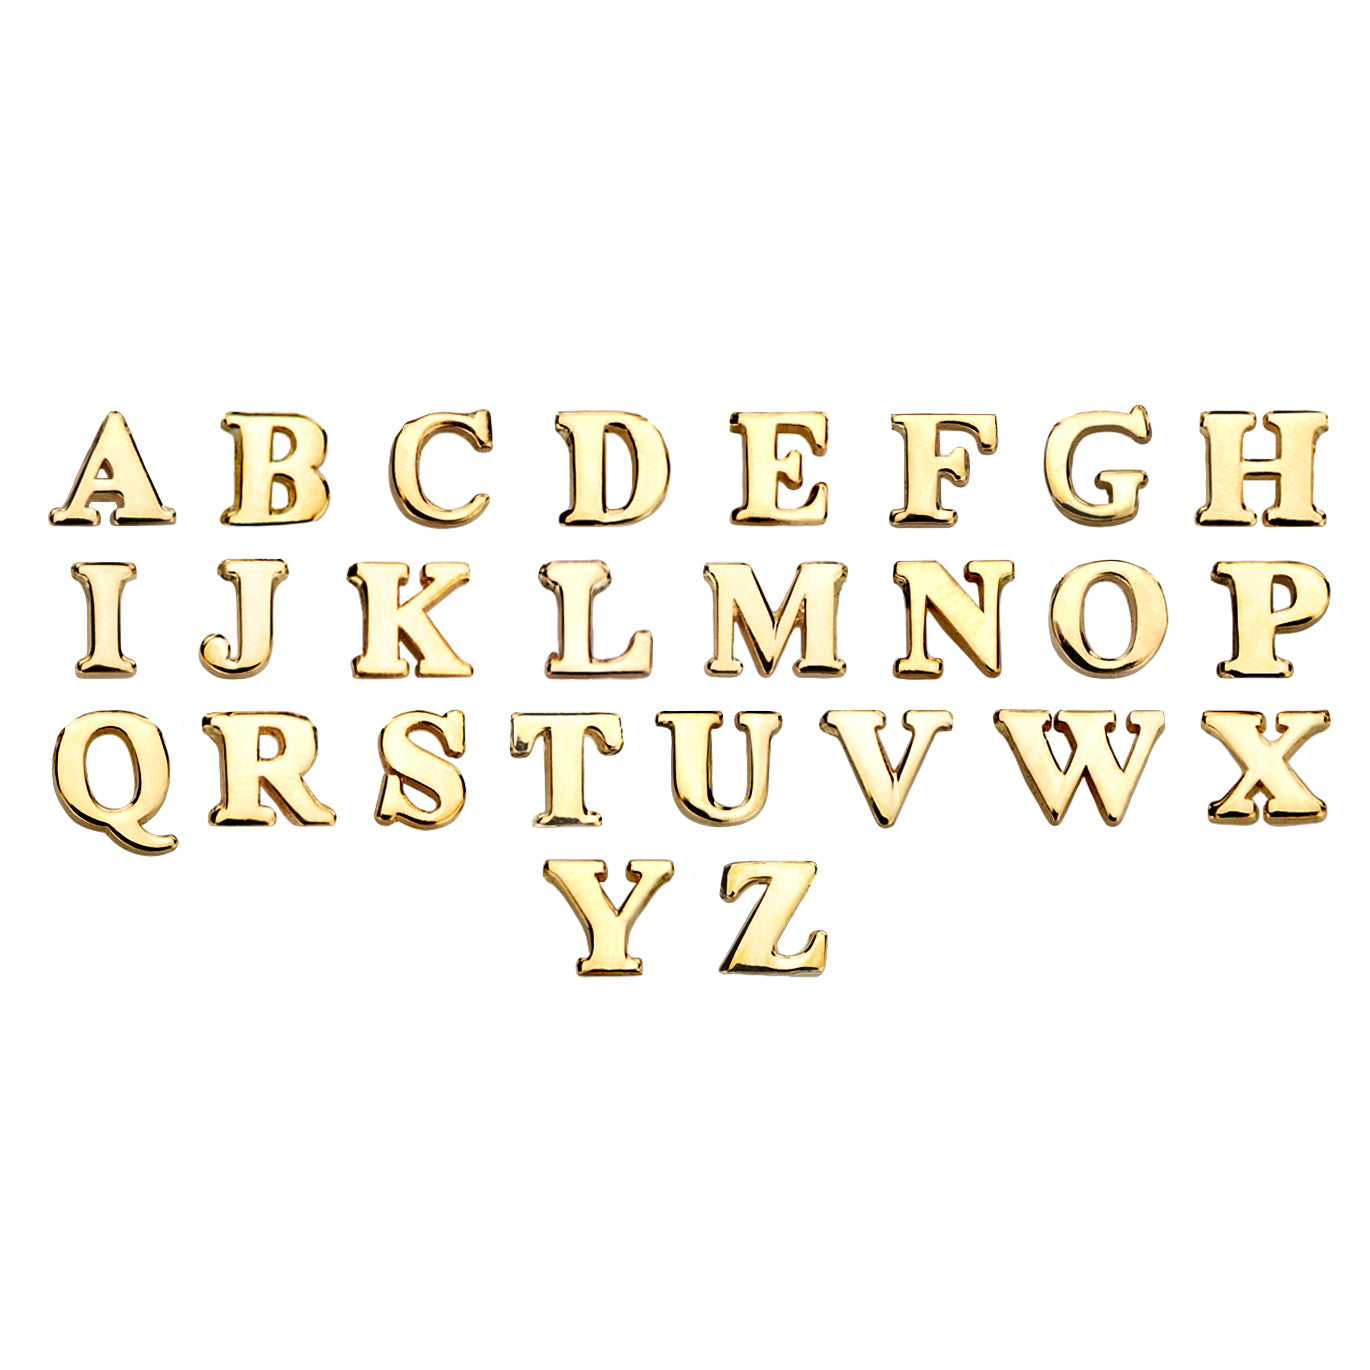 26 14k gold initial letters alphabet_628ee135 c931 4fe7 beff b523bc0cb9d1